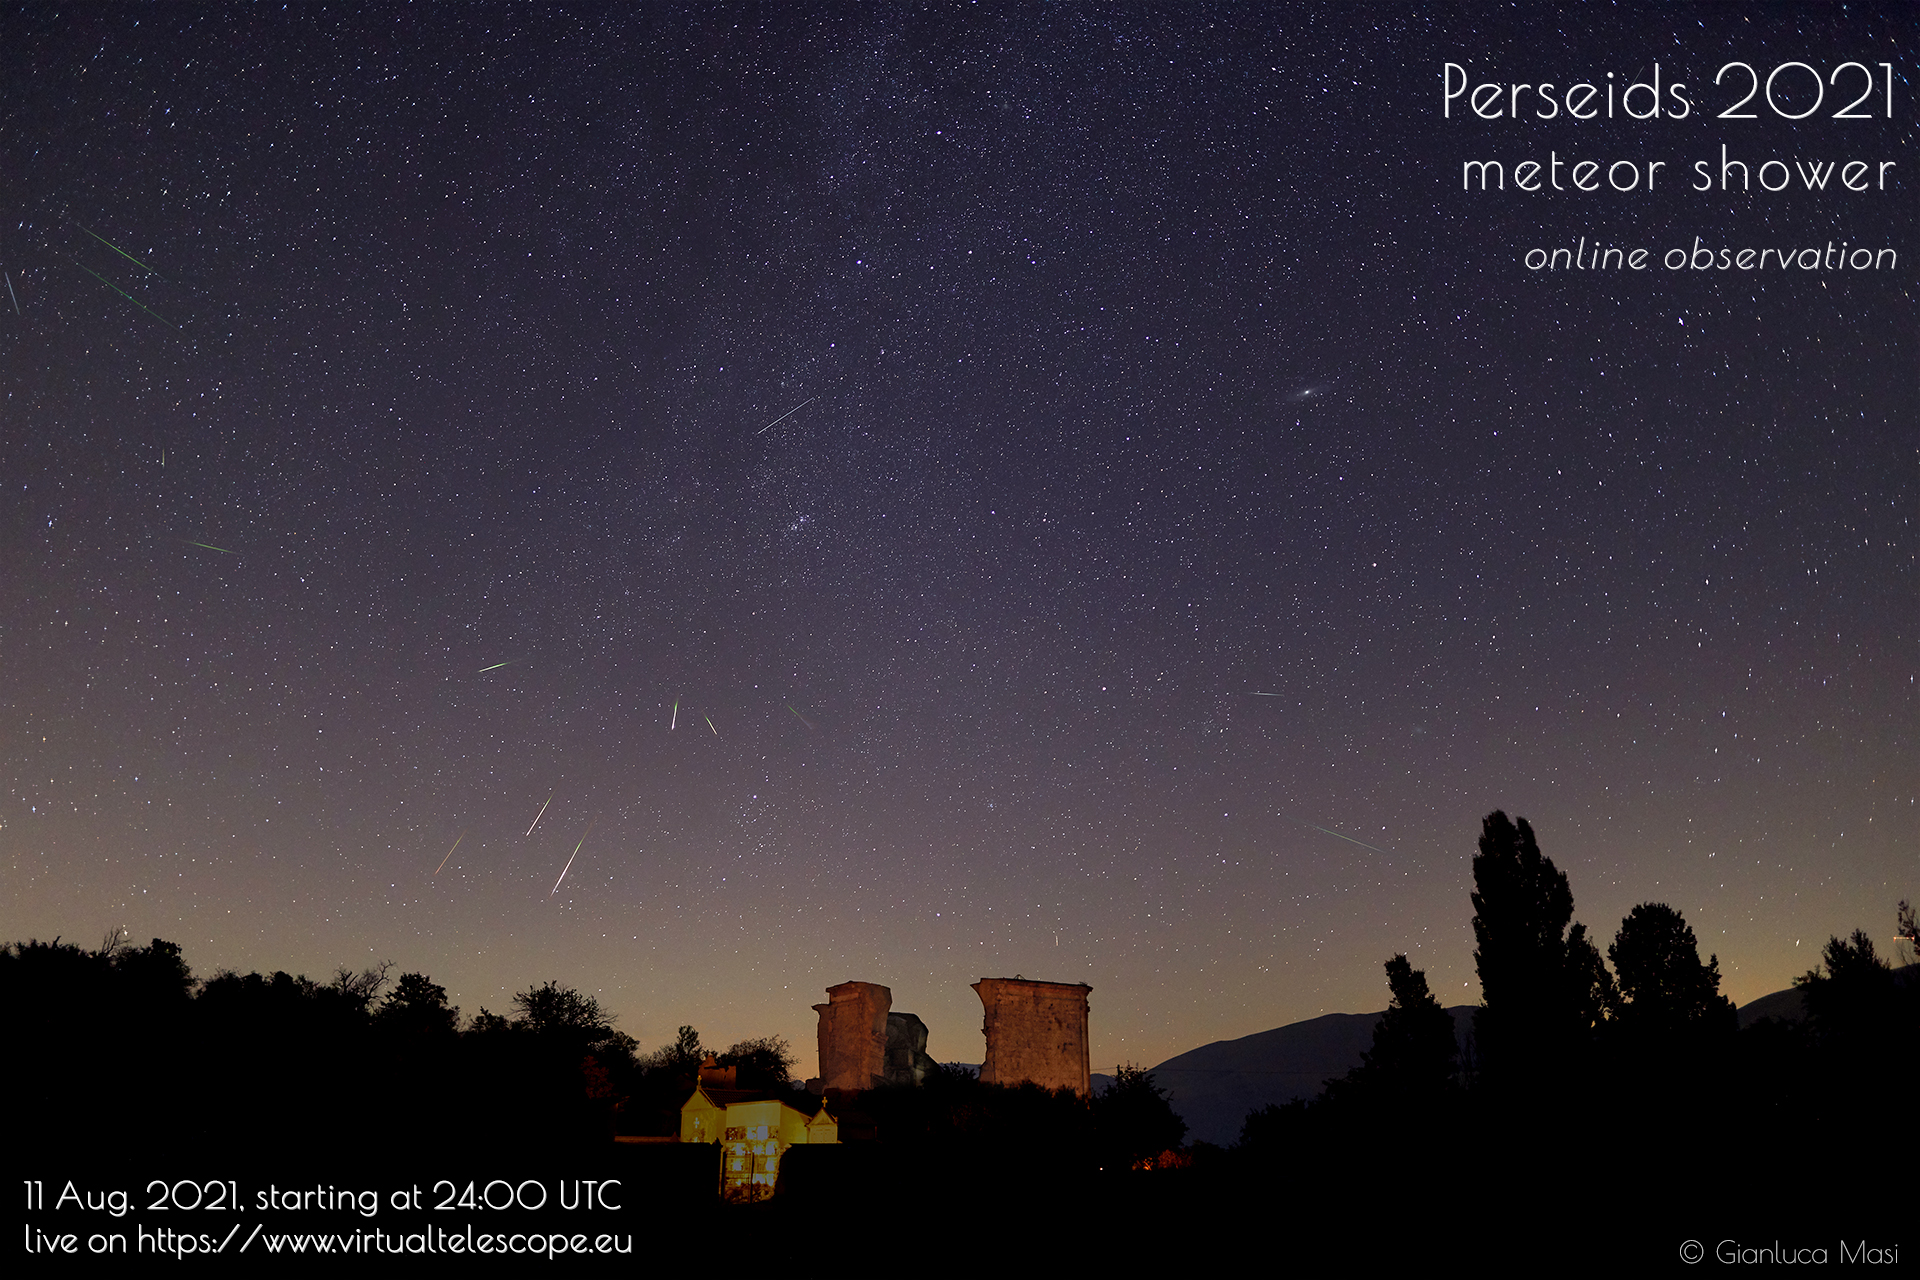 Perseids 2021: poster of the event